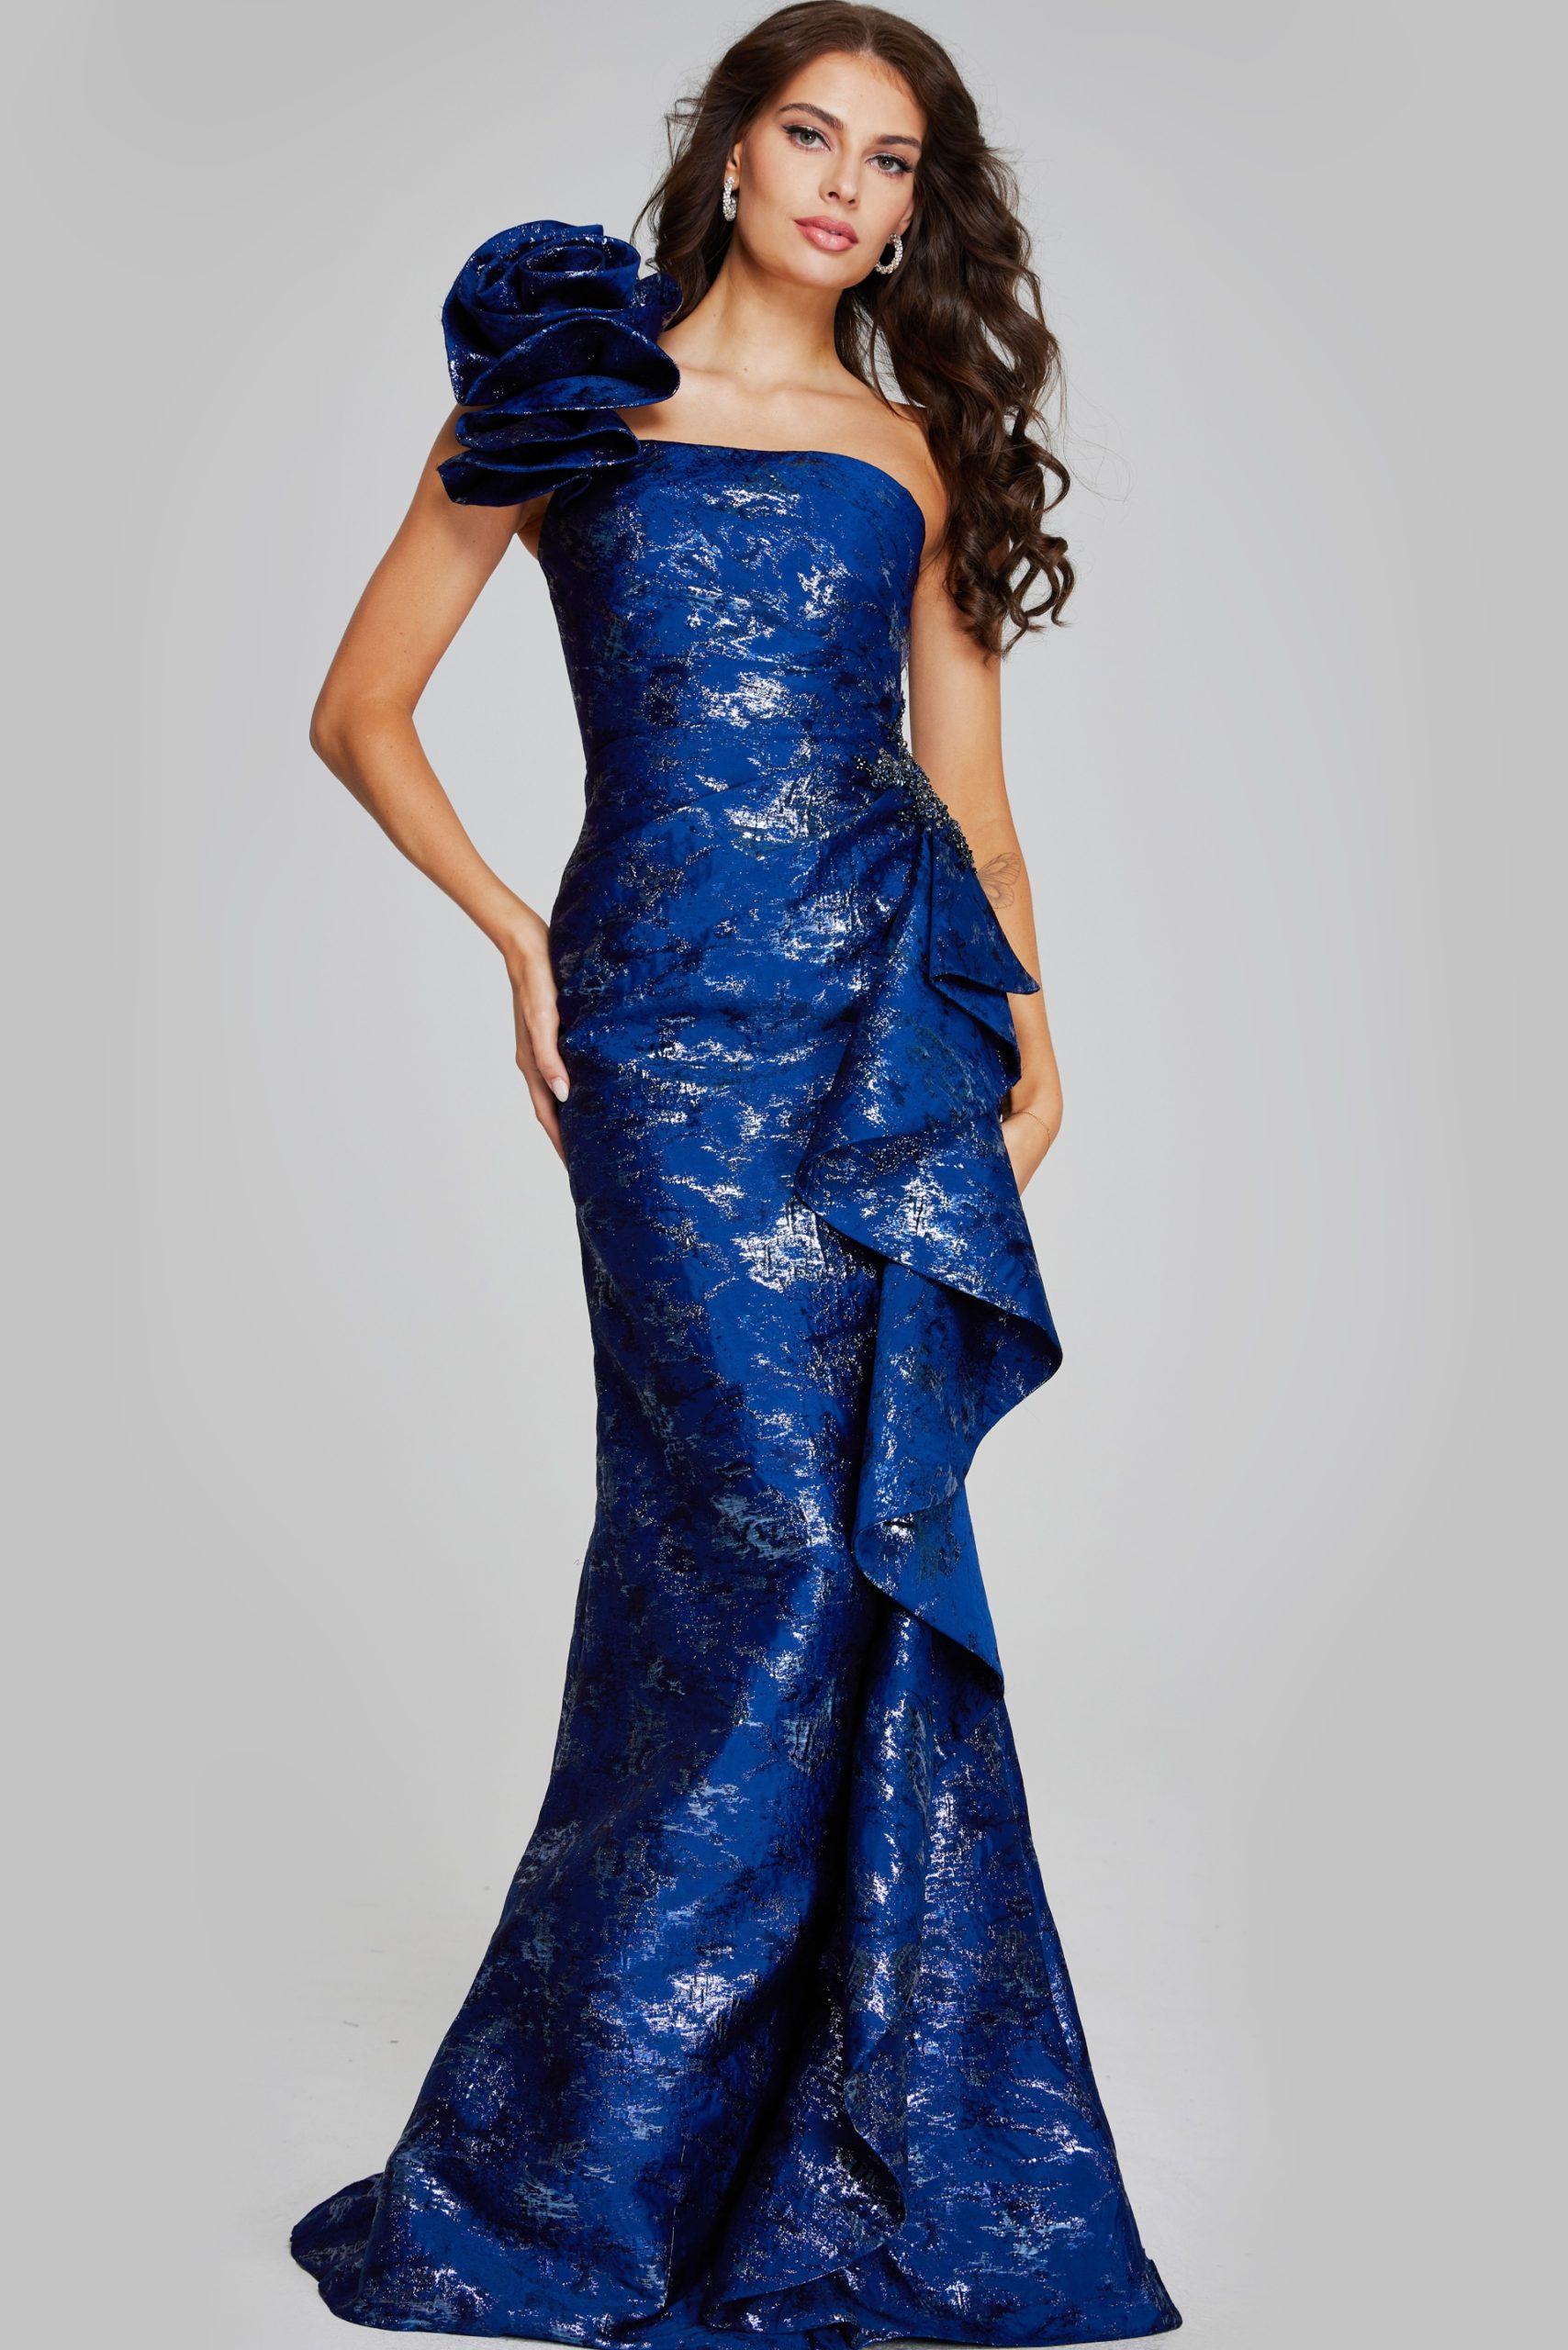 Stunning One-Shoulder Navy Gown with Elegant Rose Detail 39438